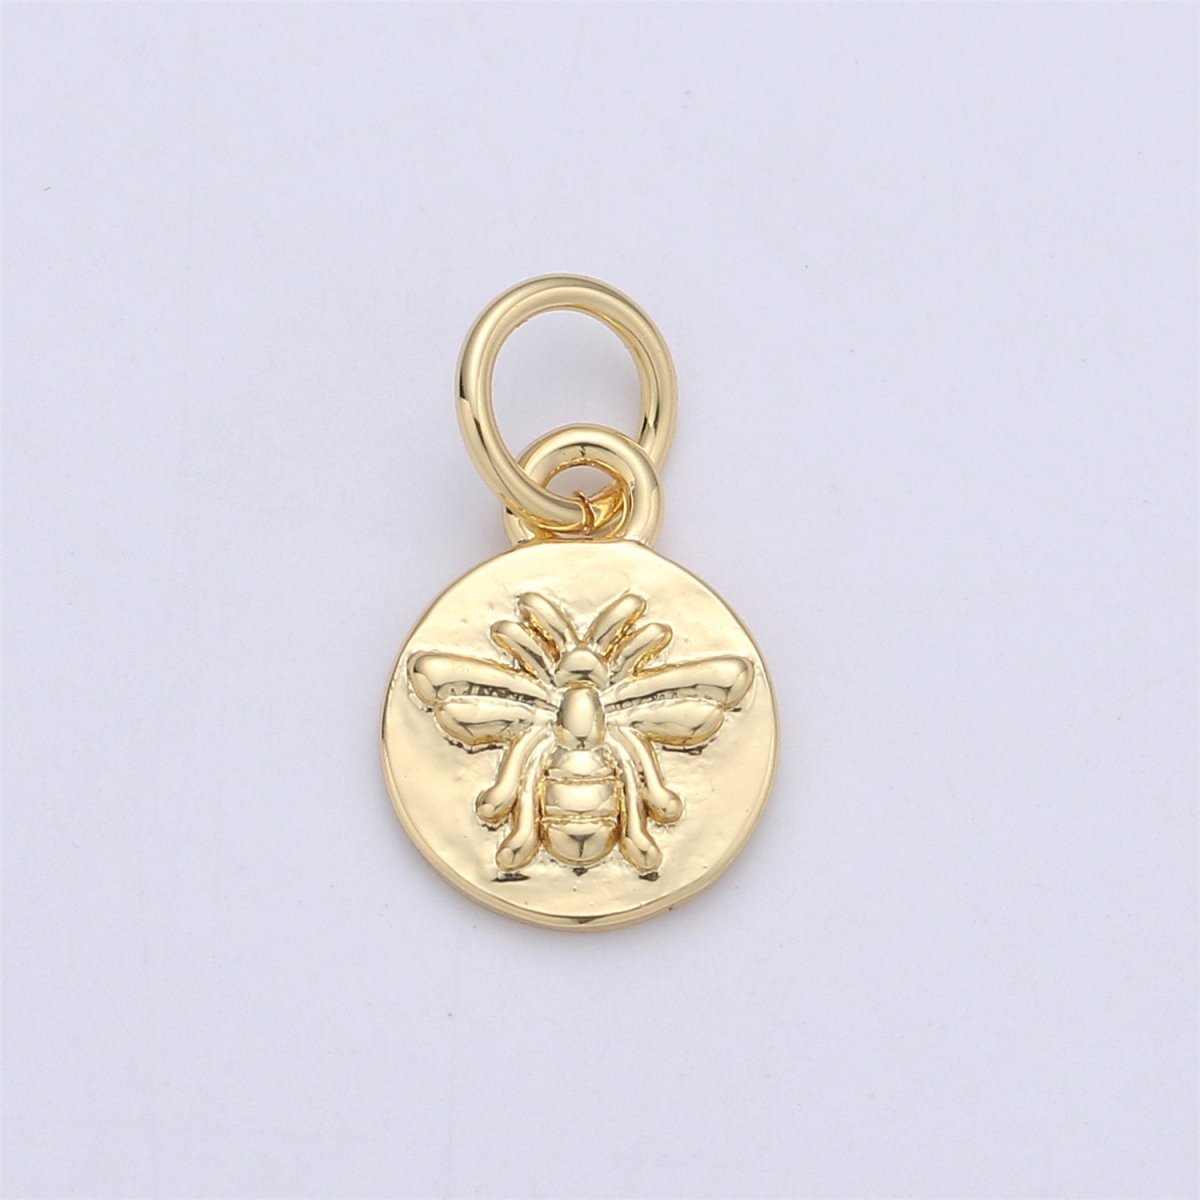 OS Dainty 18K Gold Filled Bee Charm Bumblebee, Honeybee, Queen Bee, Coin Disc Charm, Tiny Charm, Gold Charm Bracelet Earring Necklace Charm, C-349 - DLUXCA